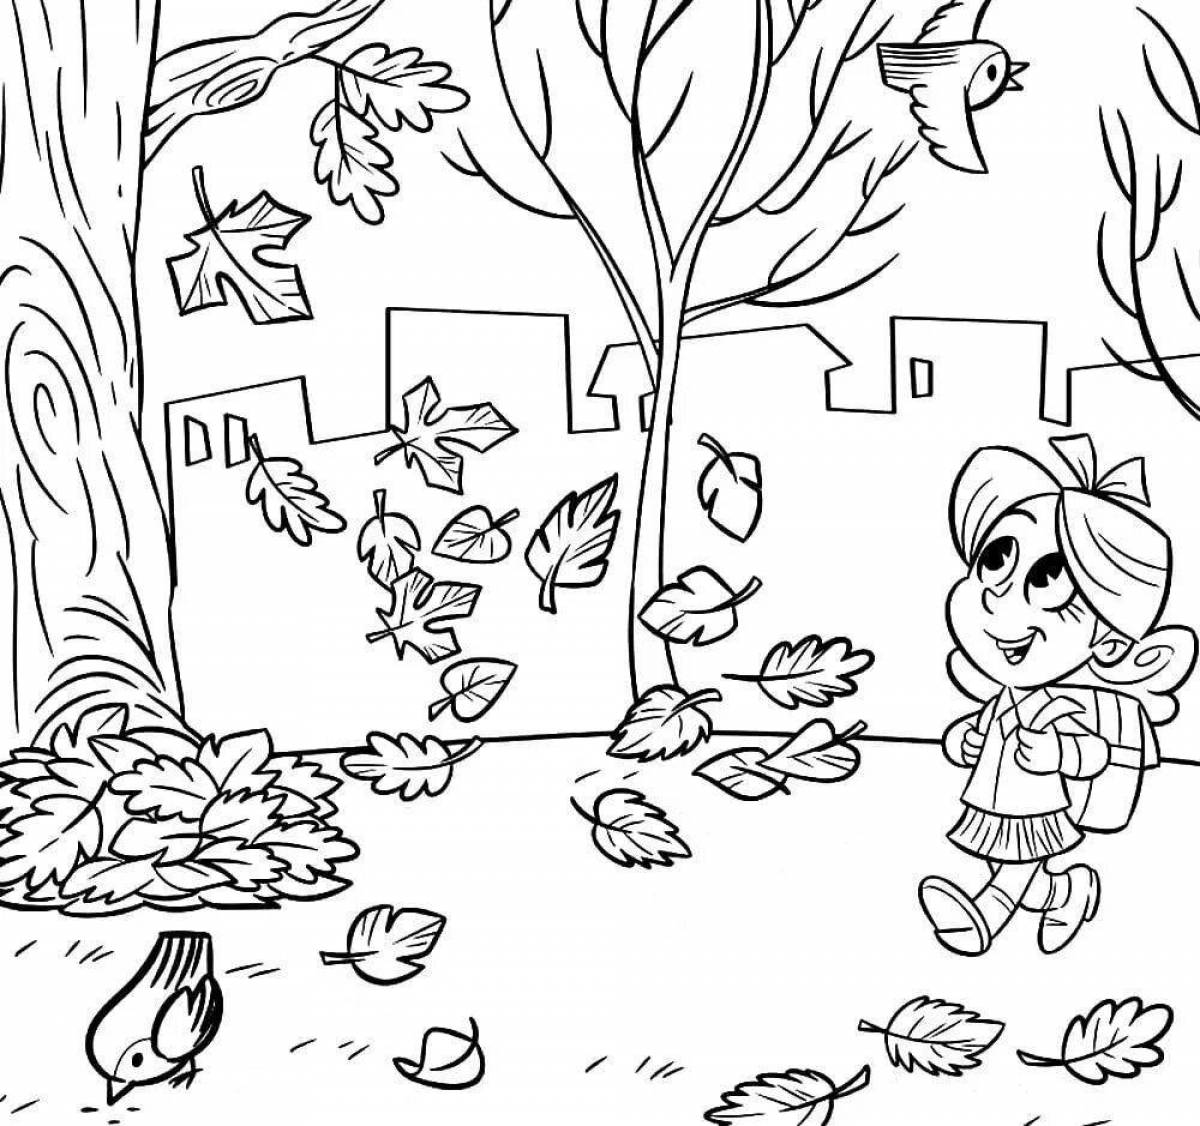 Joyful autumn coloring for children 6-7 years old